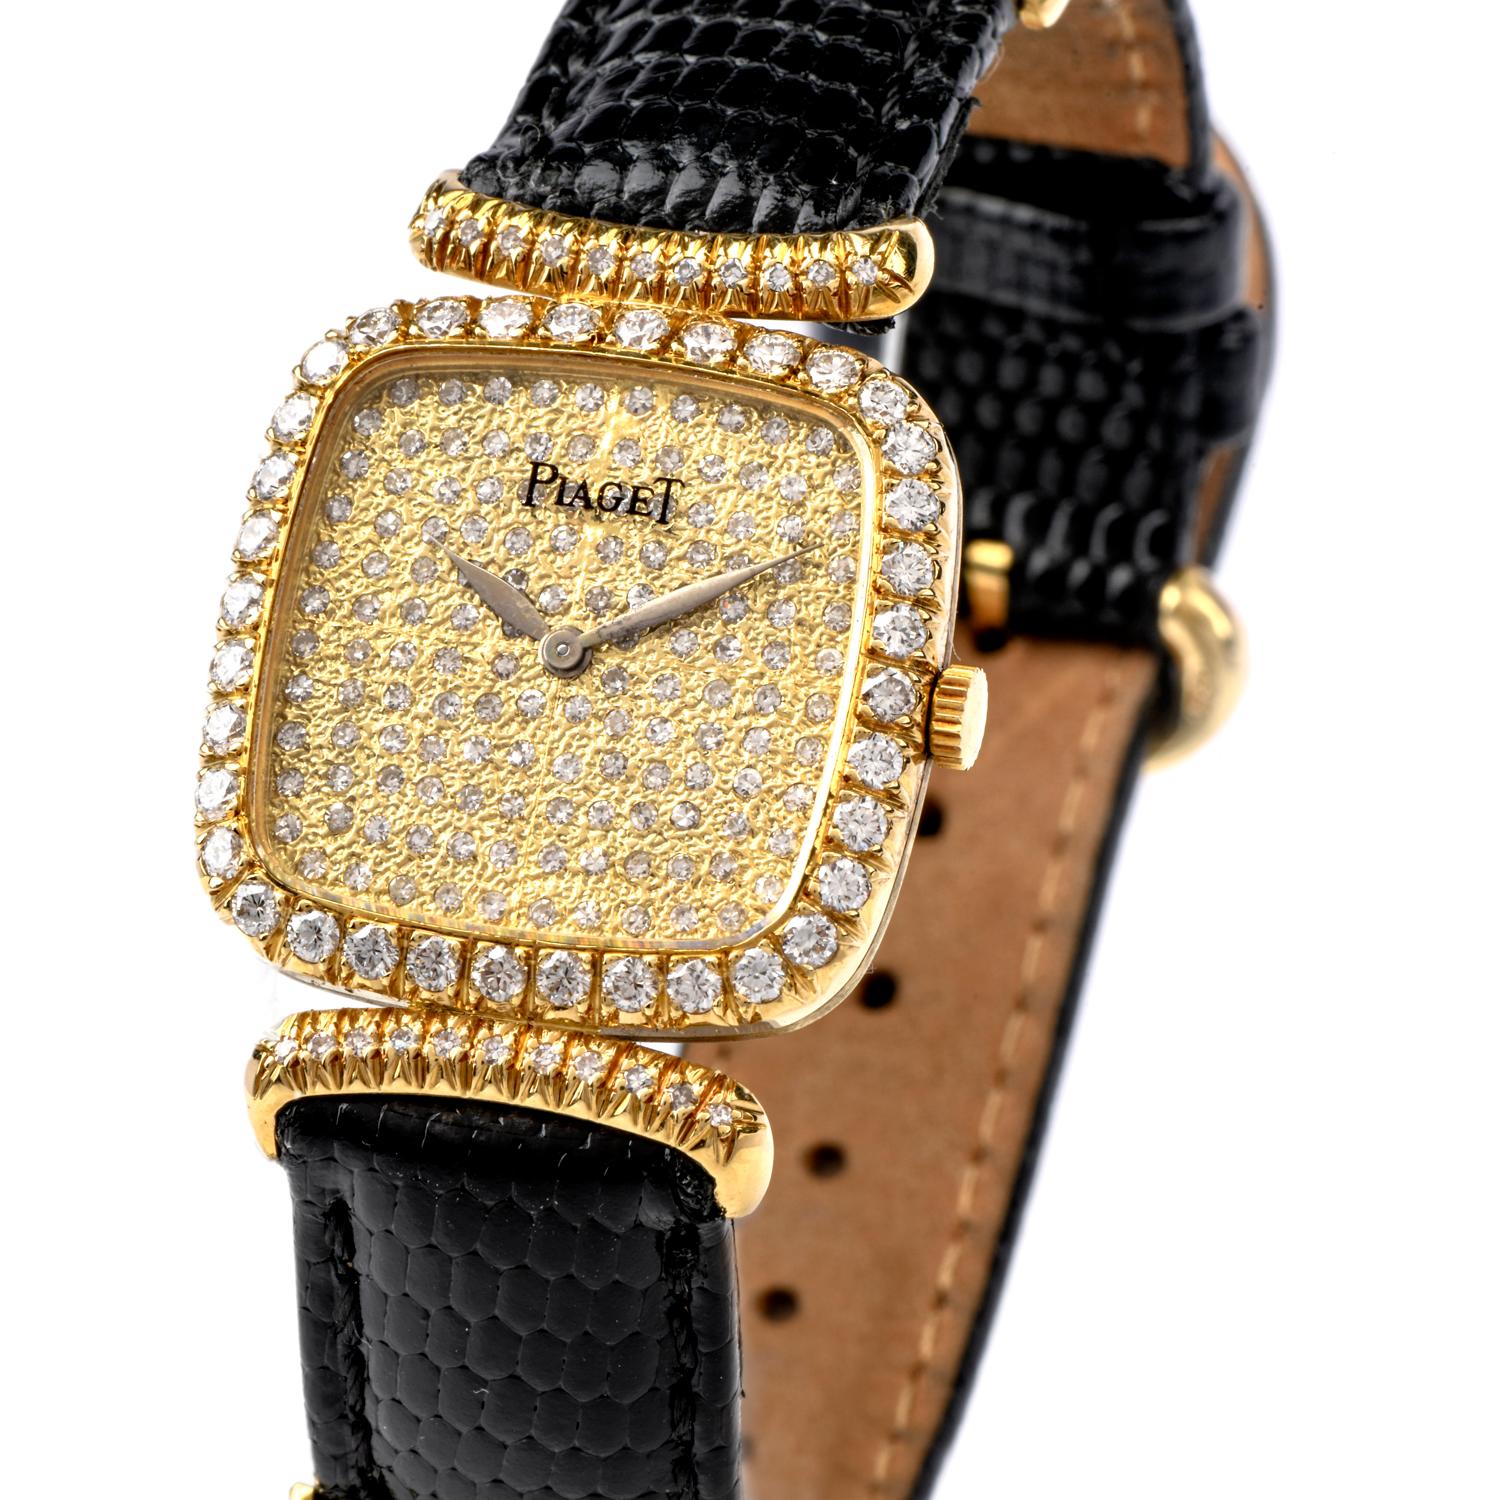 A Vintage  circa 1990's 18K yellow gold, Diamond Piaget watch features a

Pave Diamond Dial and bezel with hands cast in 18K yellow gold. mechanical Movement, cal. 9P2 manual winding nickel lever movement, 18 jewels, mono-metallic